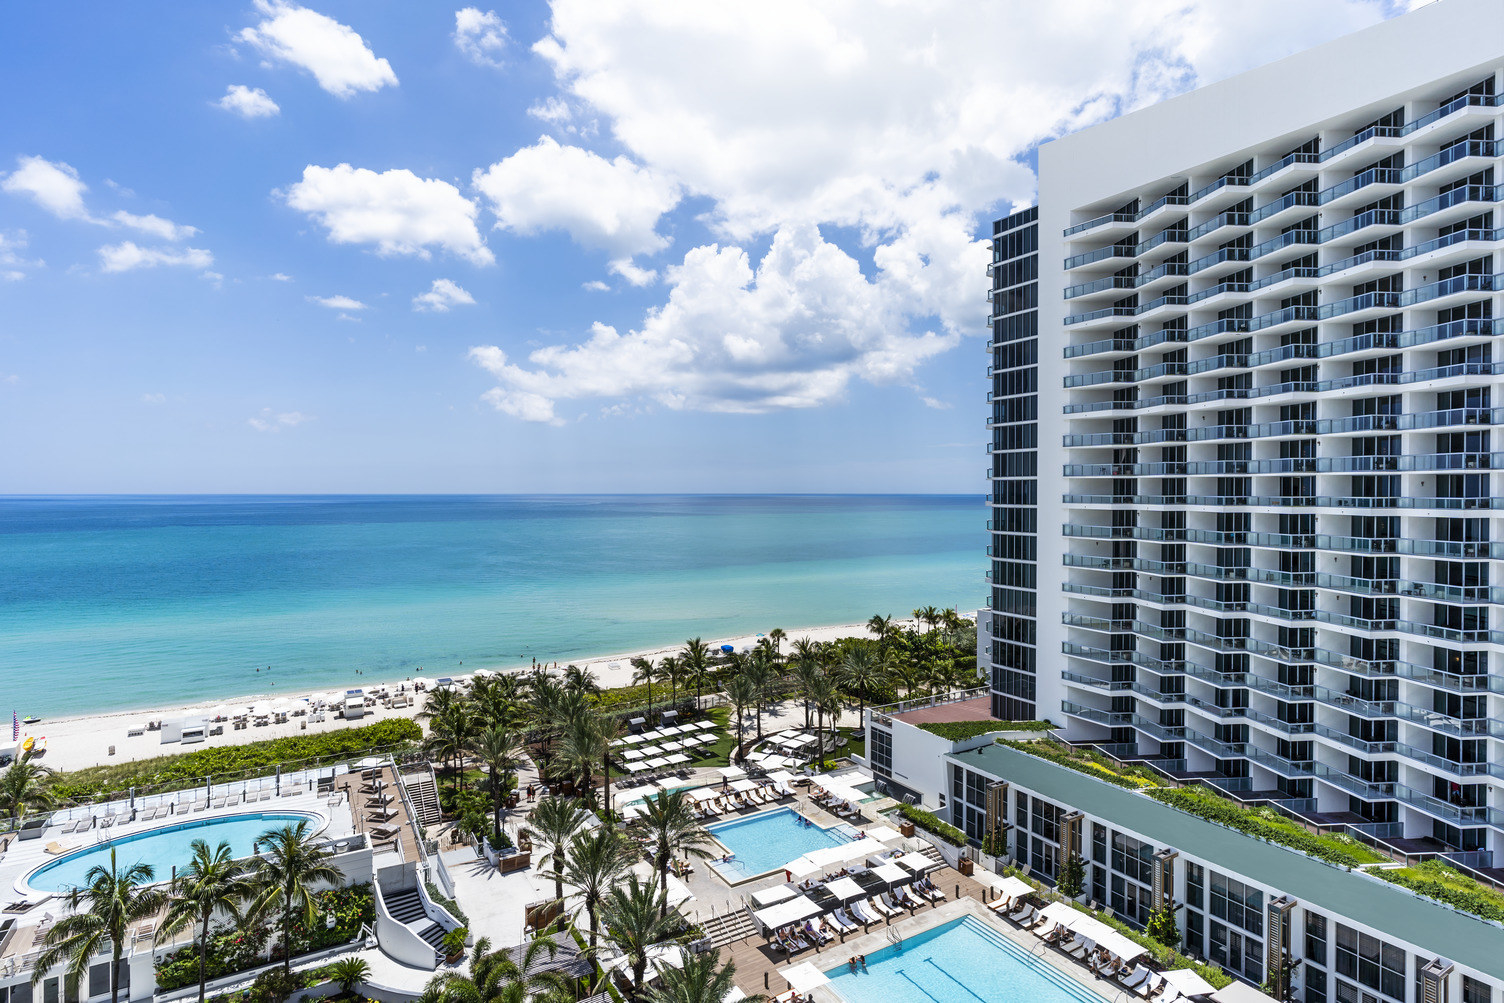 The Best Hotels In Miami Beach That Are Relatively Cheap